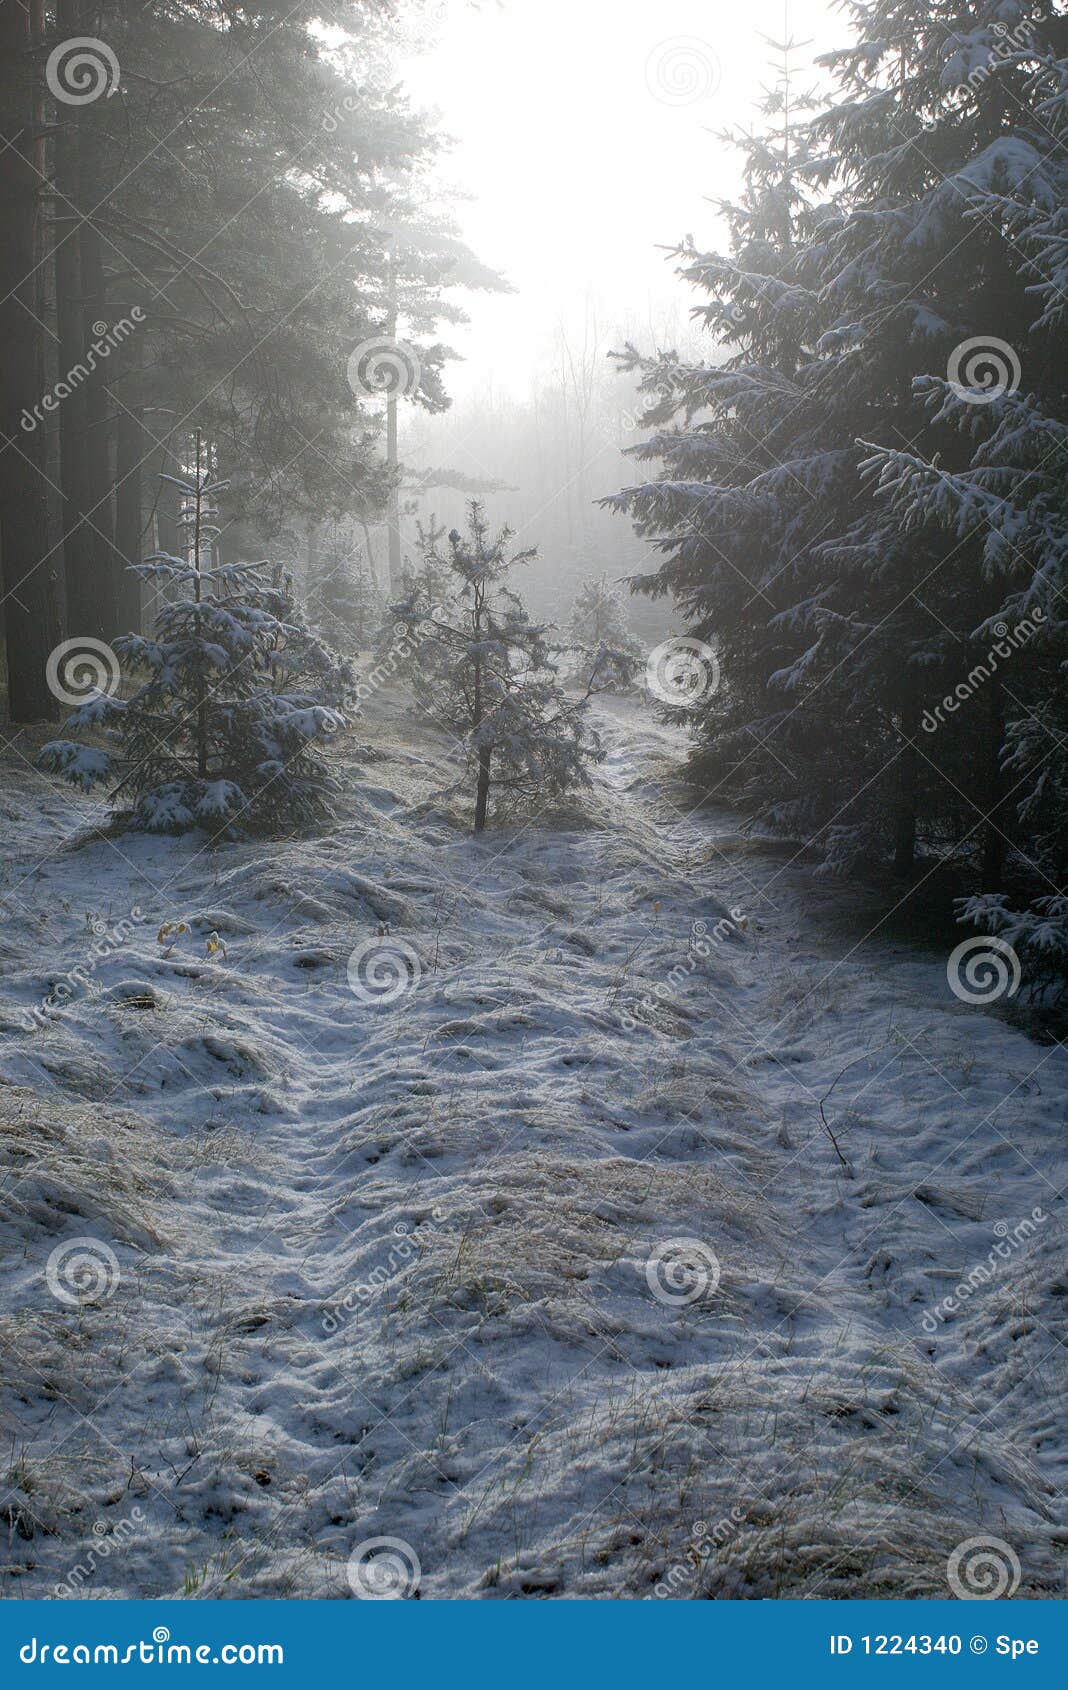 Foggy path stock photo. Image of misty, dreamy, branches - 1224340